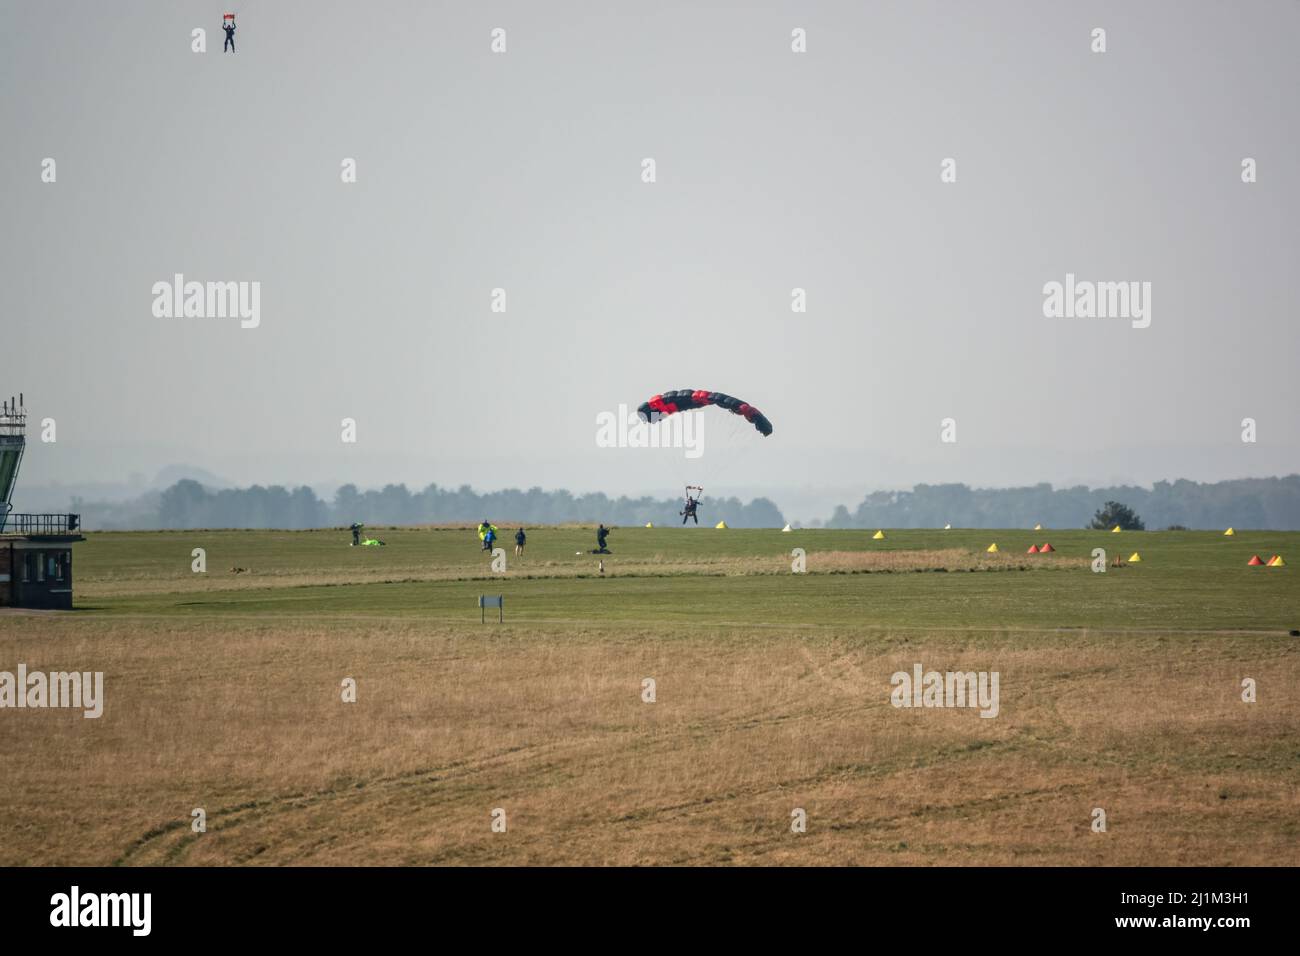 Parachute jumper coming in to land on a grass airfield, blue sky Stock Photo